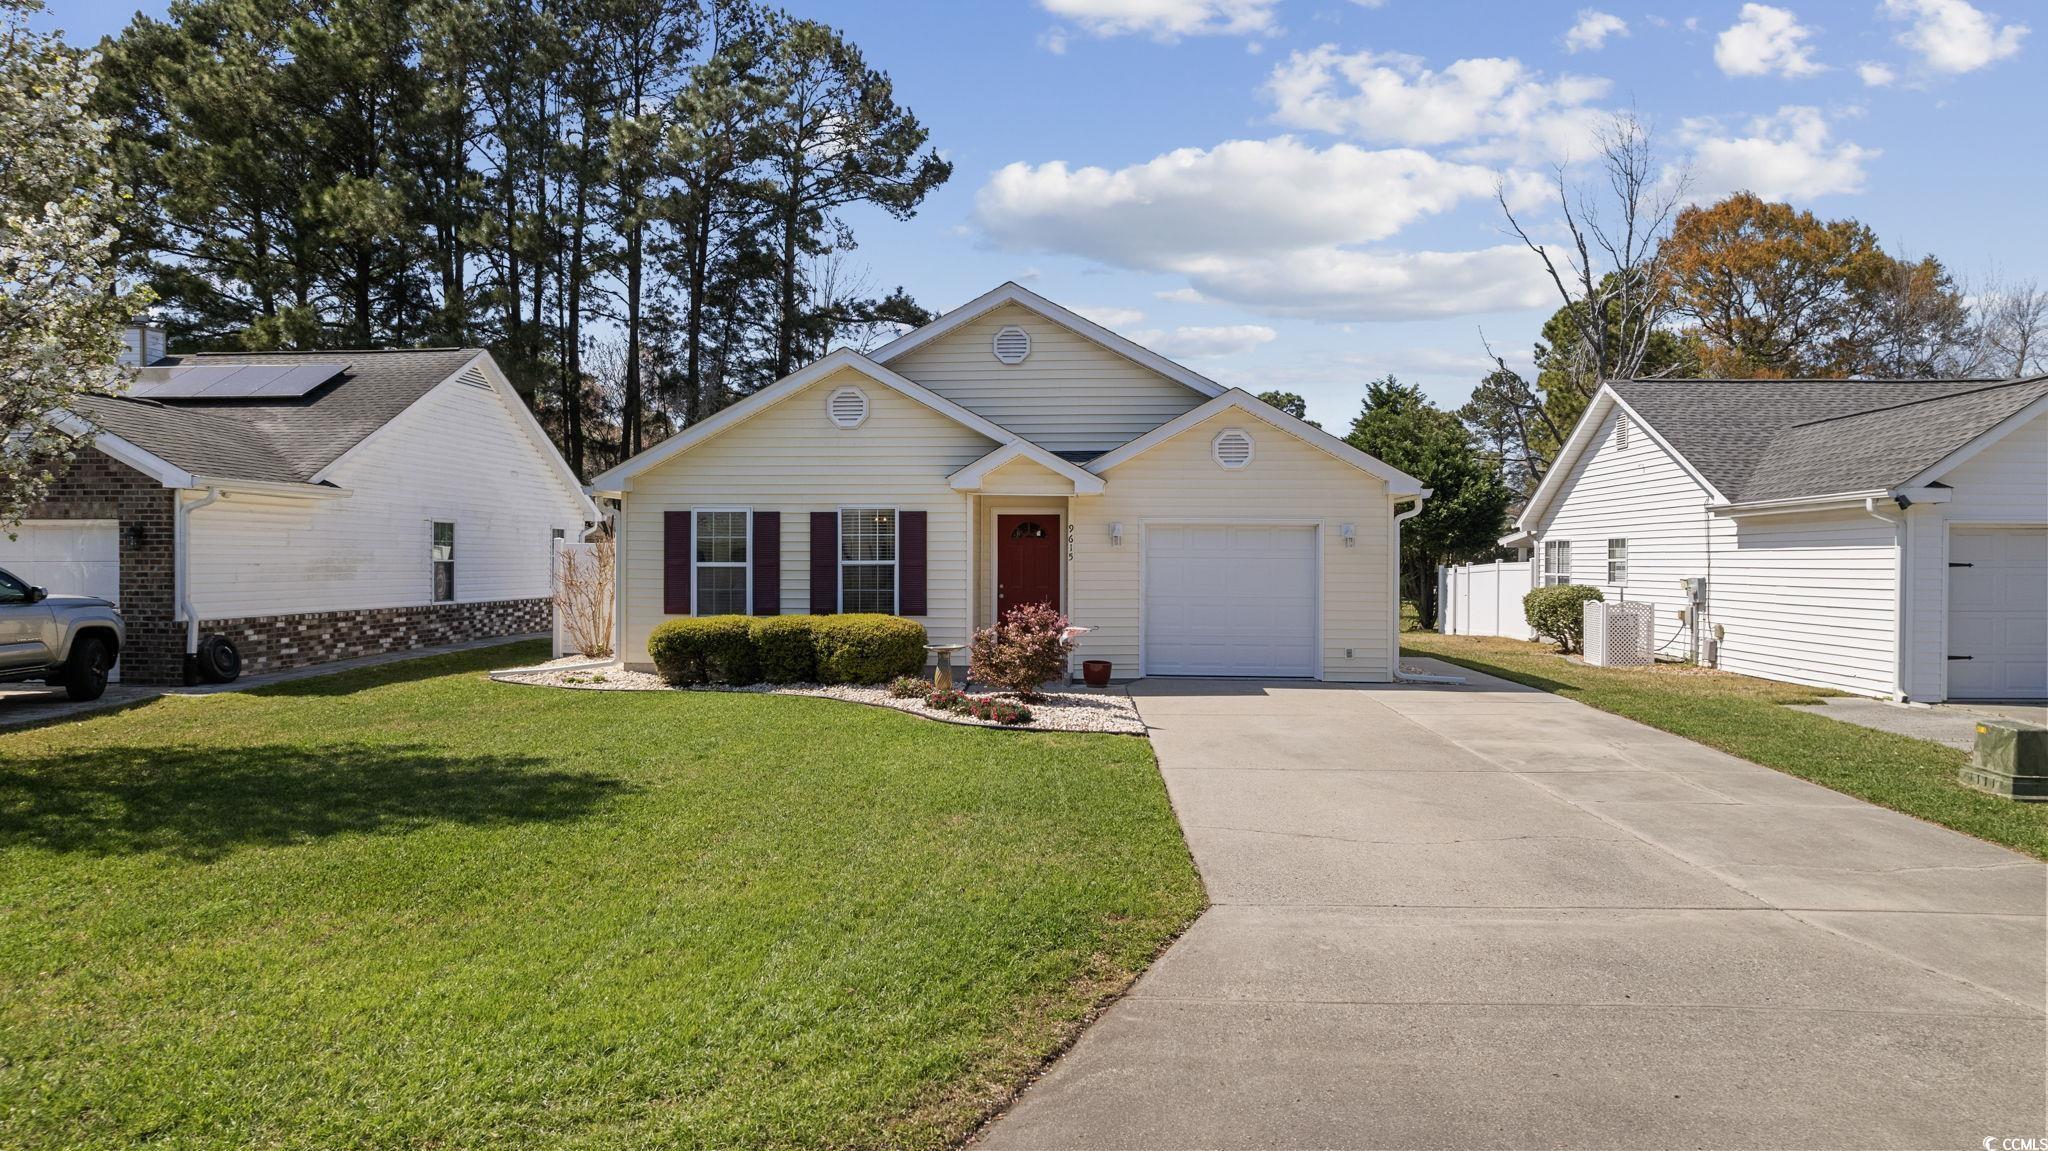 Photo one of 9615 Kings Grant Dr. Murrells Inlet SC 29576 | MLS 2407374